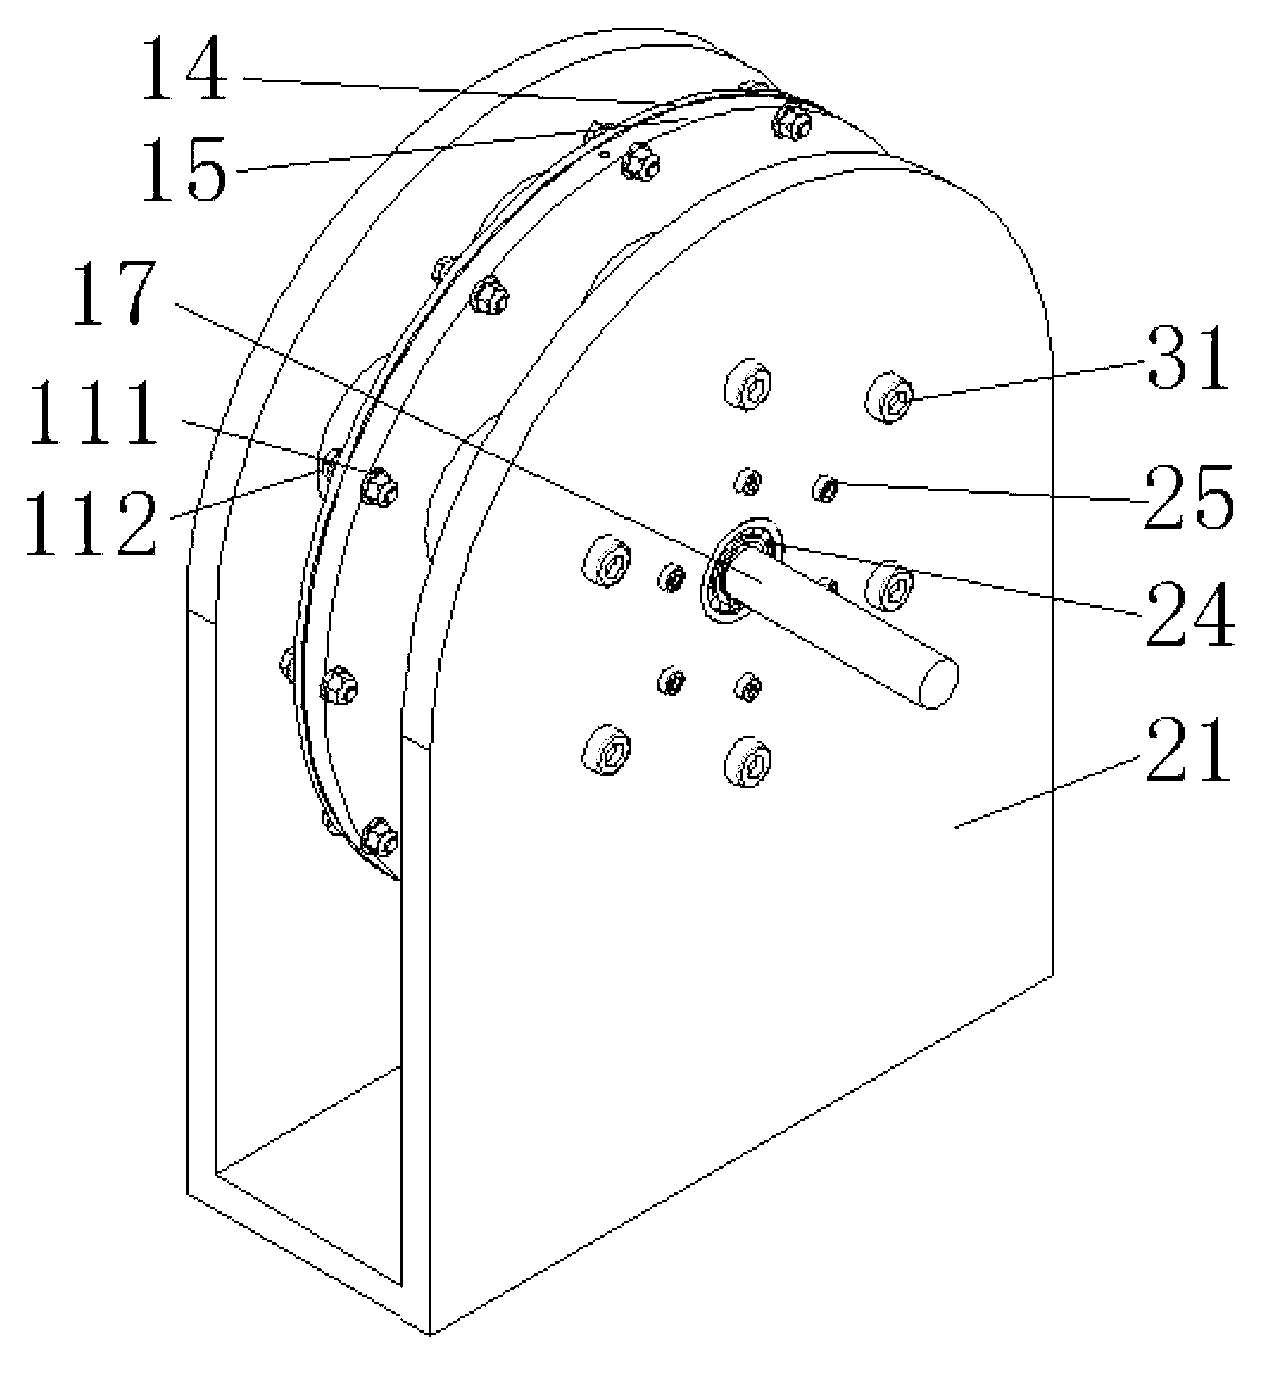 Magneto-rheological hydraulic brake executing device for electric vehicles